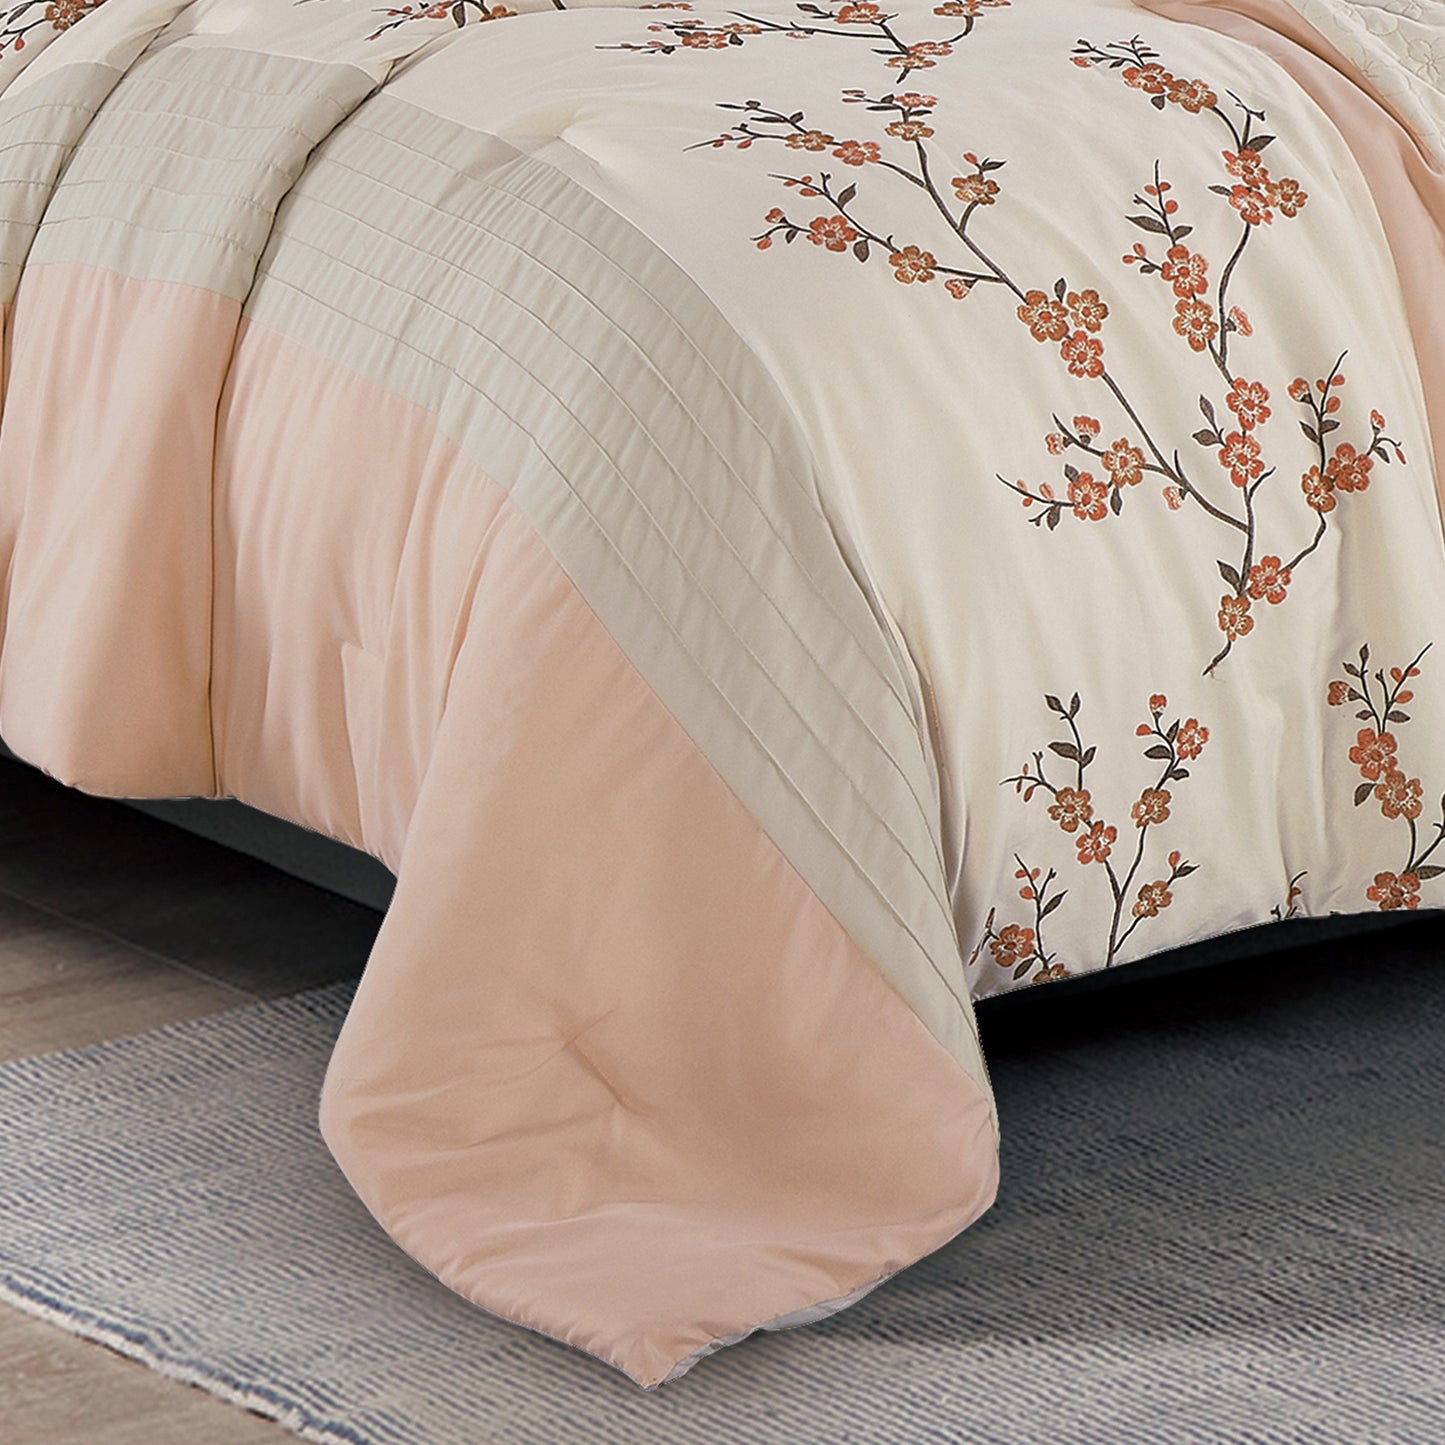 Everly 7-Piece Cherry Blossom Embroidery Bed in a Bag Comforter Set